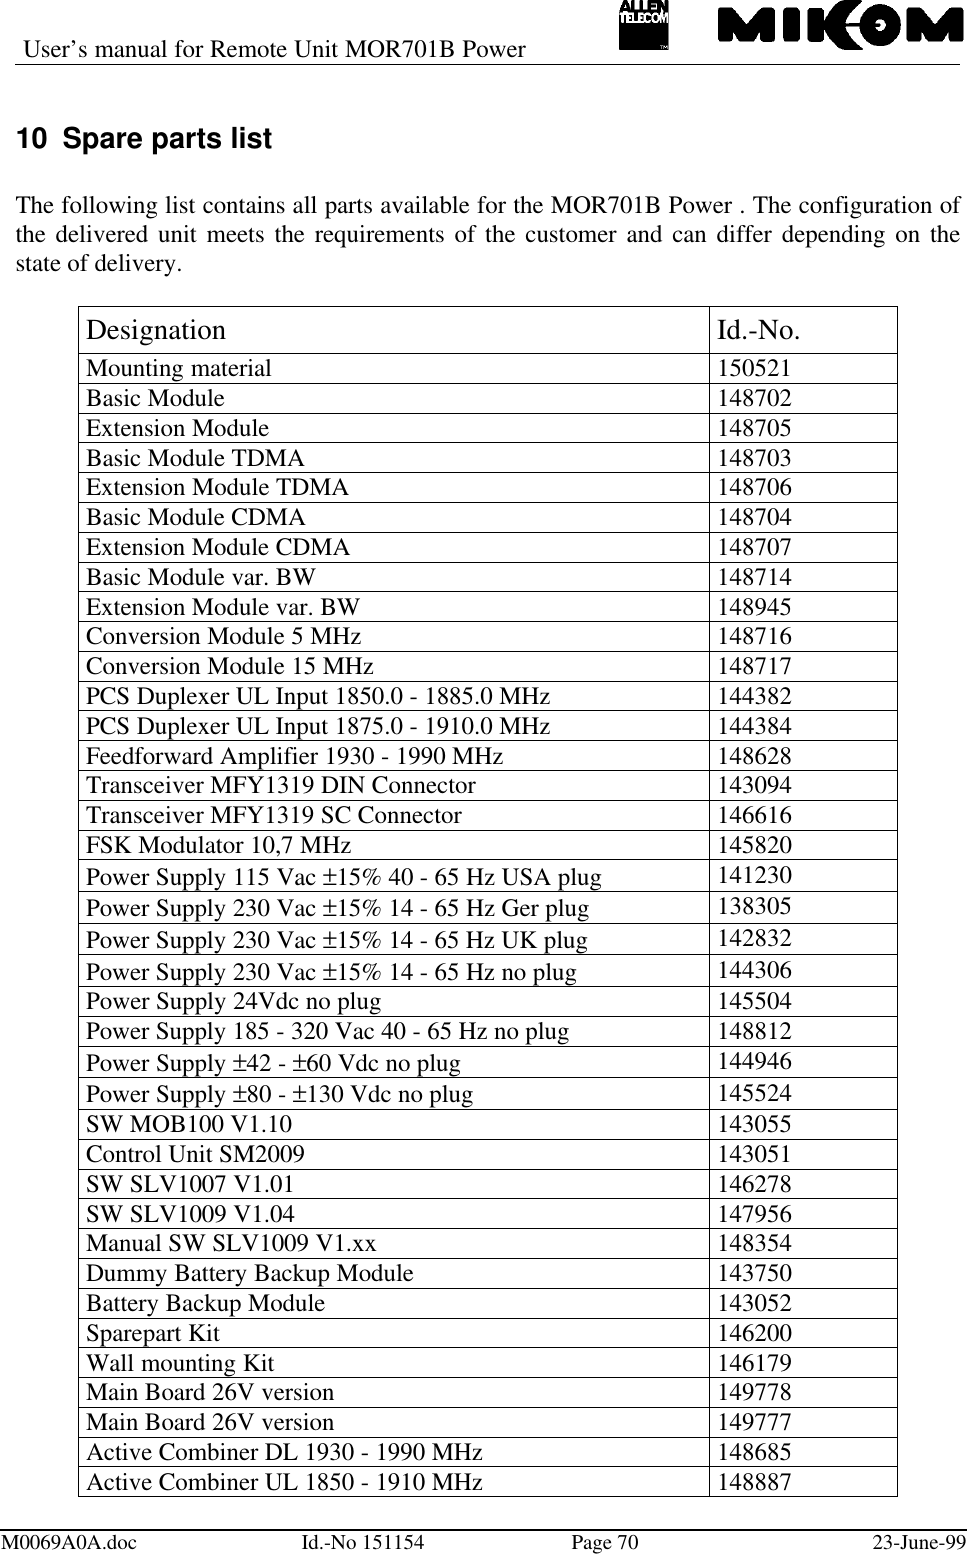 User’s manual for Remote Unit MOR701B PowerM0069A0A.doc Id.-No 151154 Page 70 23-June-9910 Spare parts listThe following list contains all parts available for the MOR701B Power . The configuration ofthe delivered unit meets the requirements of the customer and can differ depending on thestate of delivery.Designation Id.-No.Mounting material 150521Basic Module 148702Extension Module 148705Basic Module TDMA 148703Extension Module TDMA 148706Basic Module CDMA 148704Extension Module CDMA 148707Basic Module var. BW 148714Extension Module var. BW 148945Conversion Module 5 MHz 148716Conversion Module 15 MHz 148717PCS Duplexer UL Input 1850.0 - 1885.0 MHz 144382PCS Duplexer UL Input 1875.0 - 1910.0 MHz 144384Feedforward Amplifier 1930 - 1990 MHz 148628Transceiver MFY1319 DIN Connector 143094Transceiver MFY1319 SC Connector 146616FSK Modulator 10,7 MHz 145820Power Supply 115 Vac ±15% 40 - 65 Hz USA plug 141230Power Supply 230 Vac ±15% 14 - 65 Hz Ger plug 138305Power Supply 230 Vac ±15% 14 - 65 Hz UK plug 142832Power Supply 230 Vac ±15% 14 - 65 Hz no plug 144306Power Supply 24Vdc no plug 145504Power Supply 185 - 320 Vac 40 - 65 Hz no plug 148812Power Supply ±42 - ±60 Vdc no plug 144946Power Supply ±80 - ±130 Vdc no plug 145524SW MOB100 V1.10 143055Control Unit SM2009 143051SW SLV1007 V1.01 146278SW SLV1009 V1.04 147956Manual SW SLV1009 V1.xx 148354Dummy Battery Backup Module 143750Battery Backup Module 143052Sparepart Kit 146200Wall mounting Kit 146179Main Board 26V version 149778Main Board 26V version 149777Active Combiner DL 1930 - 1990 MHz 148685Active Combiner UL 1850 - 1910 MHz 148887